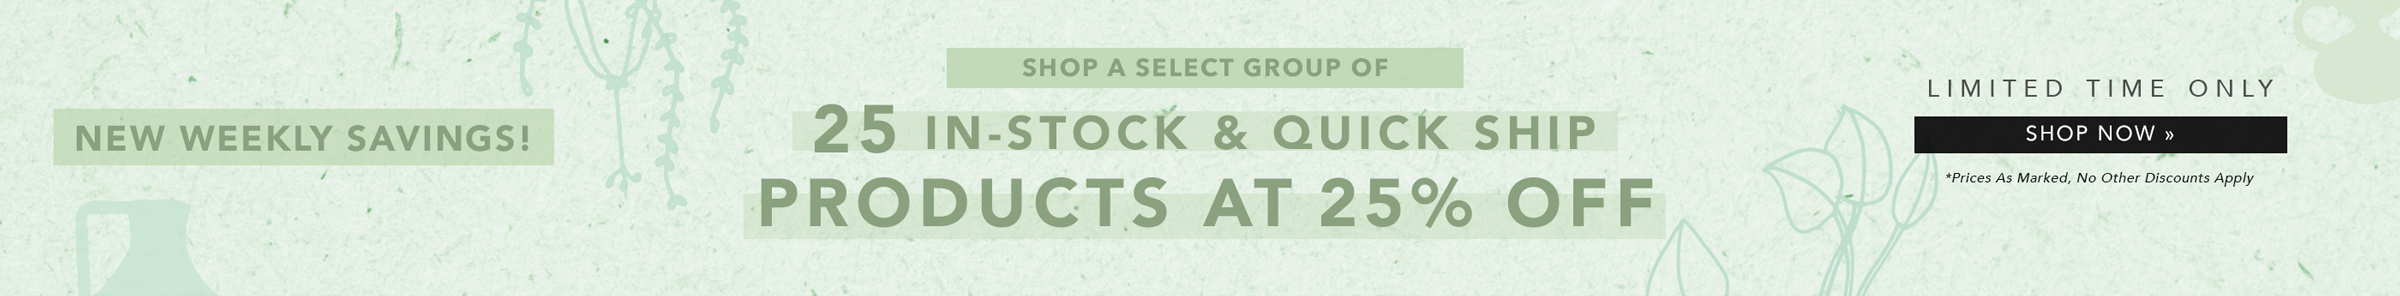 NEW WEEKLY SAVINGS! Shop A Select Group Of 25 In-Stock & Quick Ship Products at 25% Off Now »